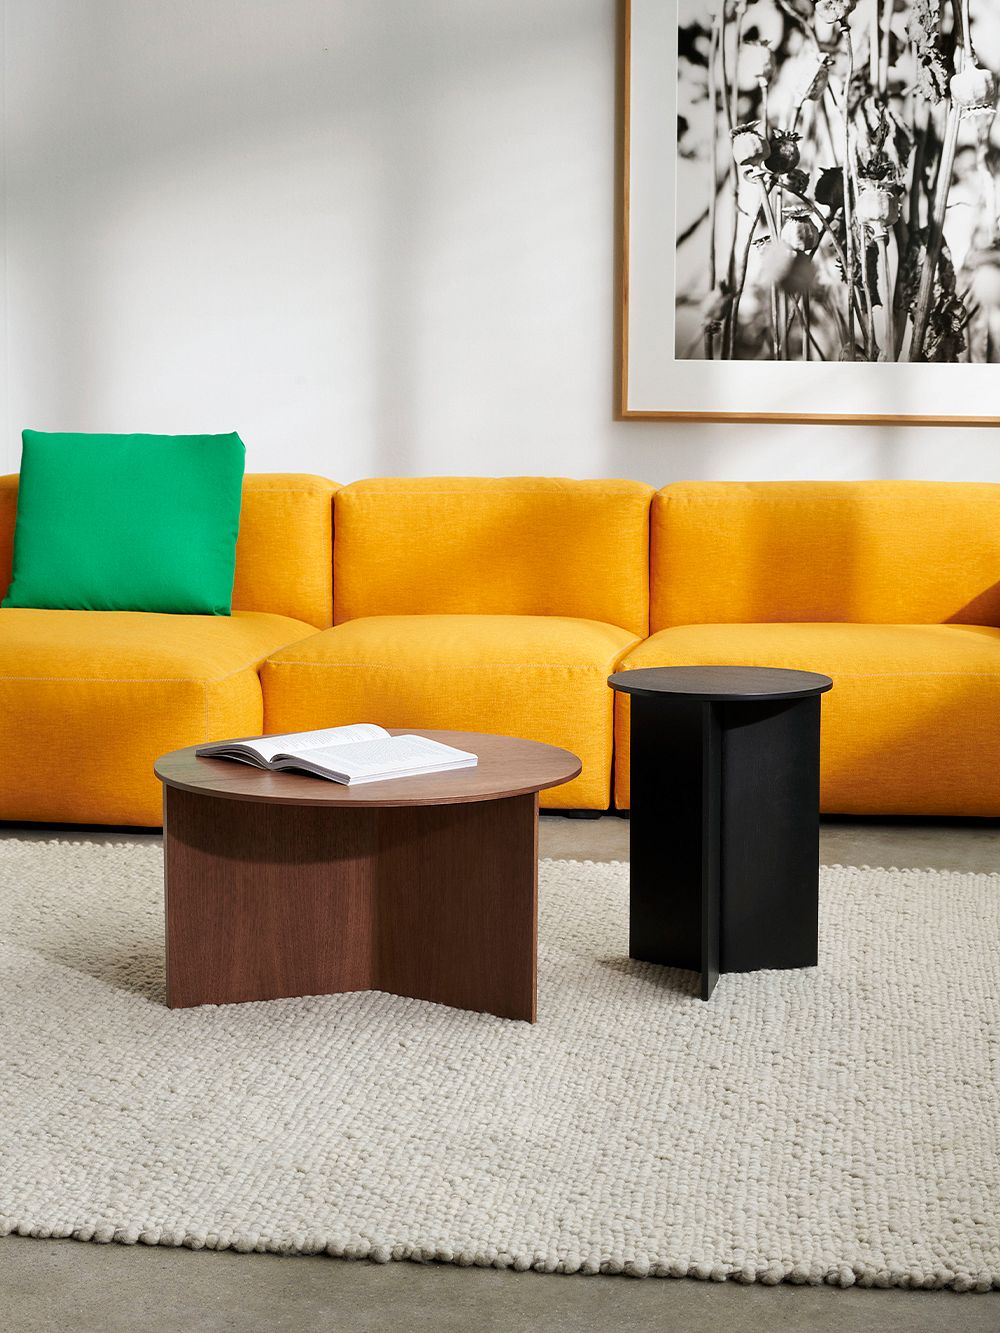 There are two Slit Wood tables in front of an orange sofa, a lower one in dark wood and a higher one in black. There is an open book on the wood-colored table.